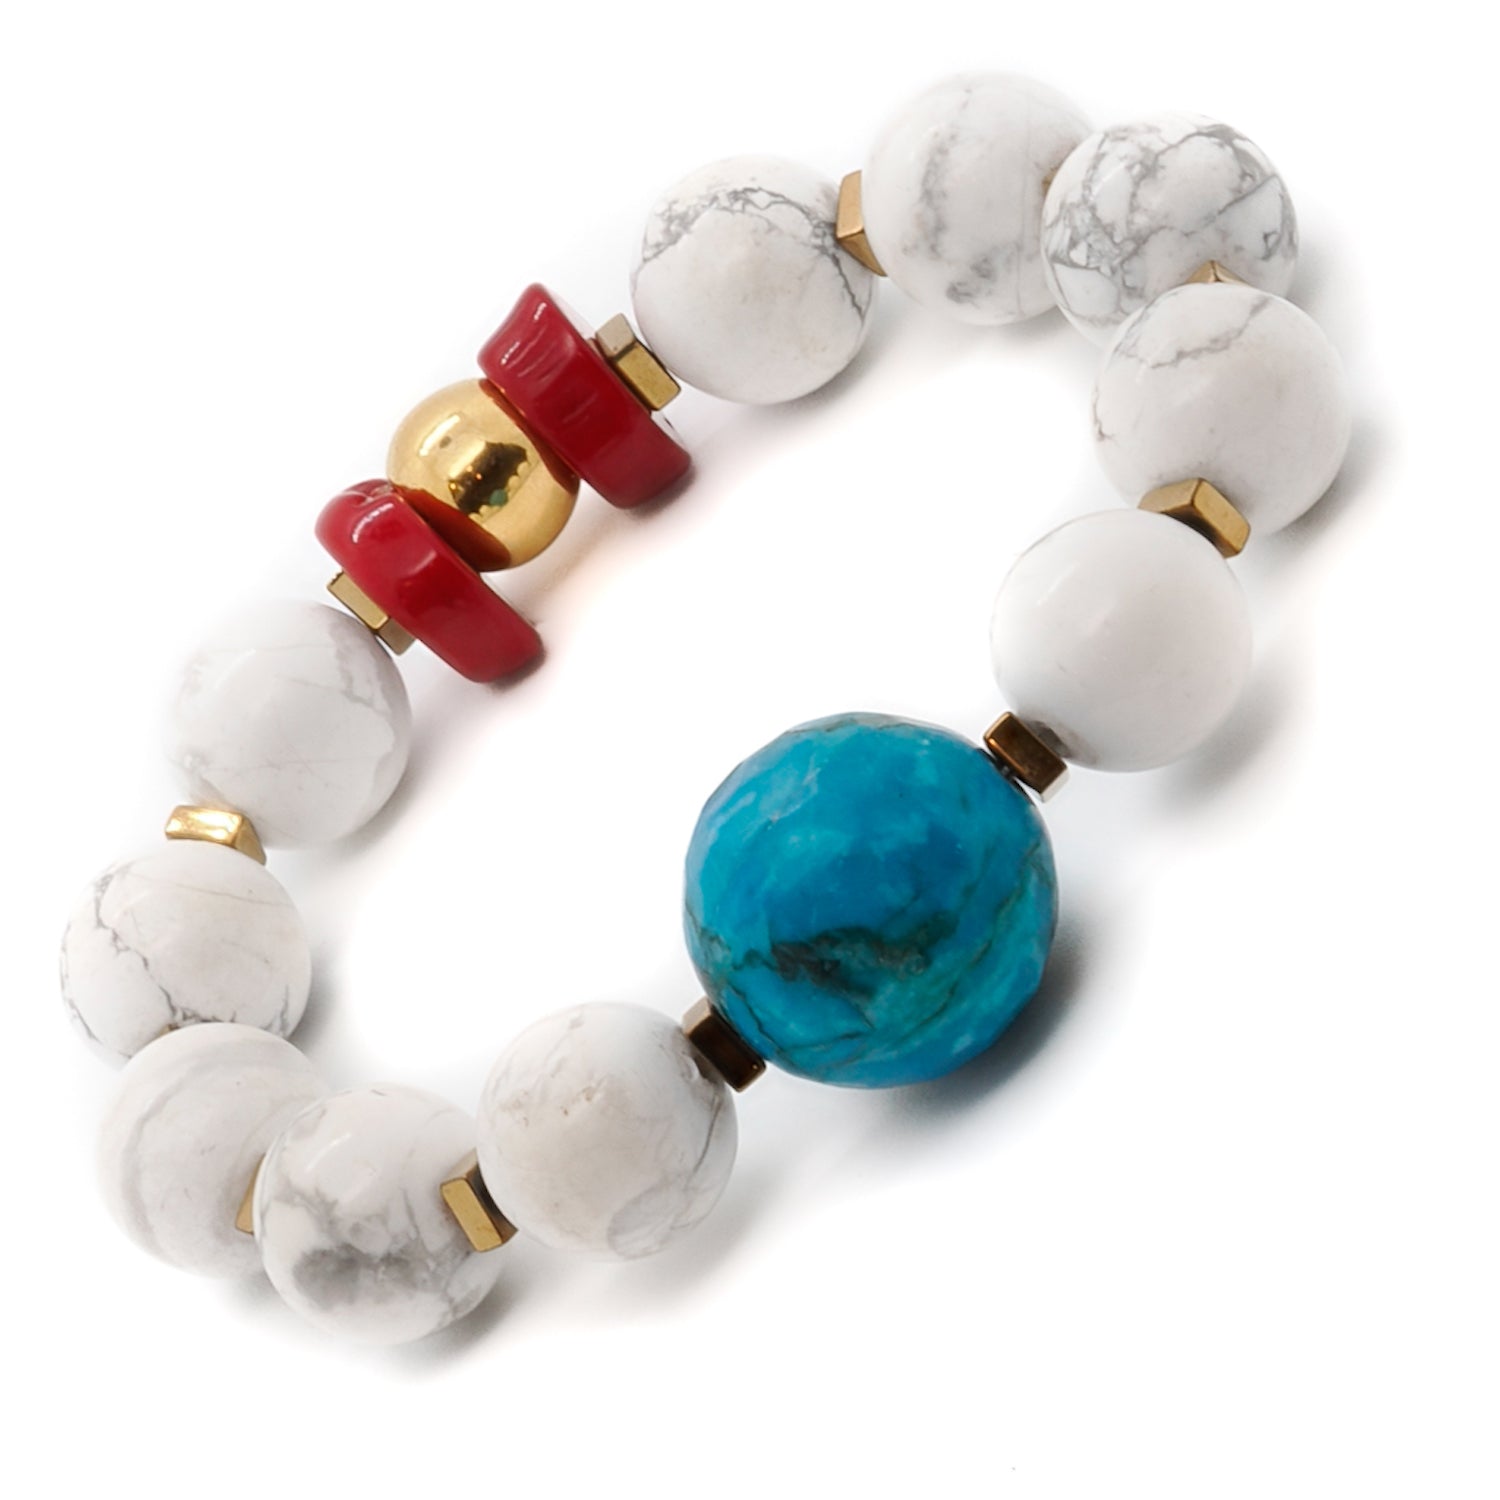 Achieve inner calm and balance with the Turquoise Balance Bracelet, crafted with turquoise, howlite, and red coral stones.